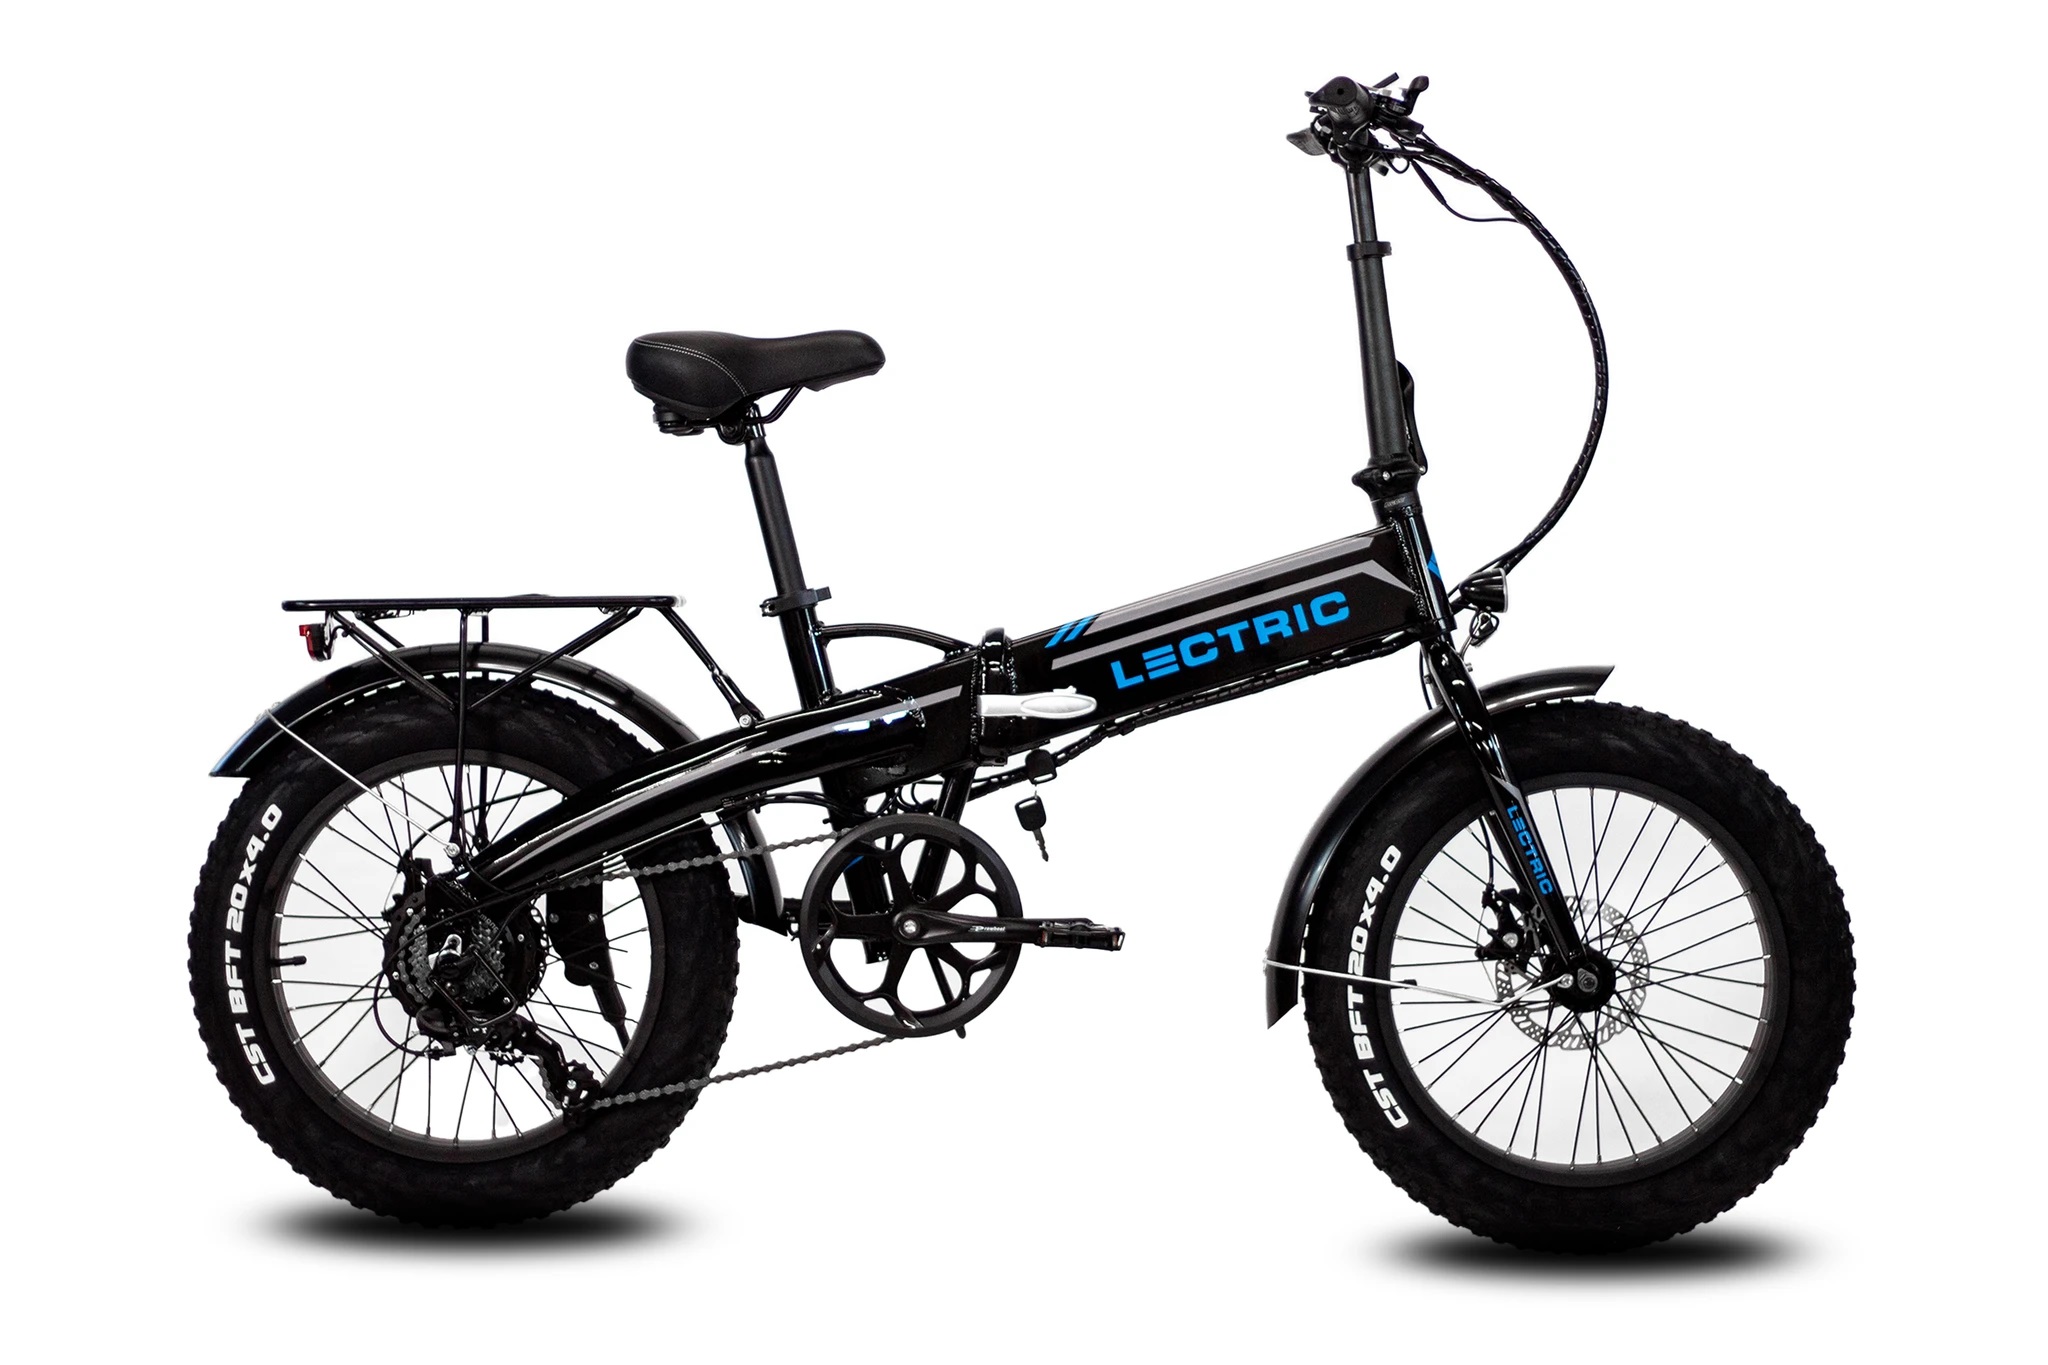 Lectric xp 2.0 electic bike in black color